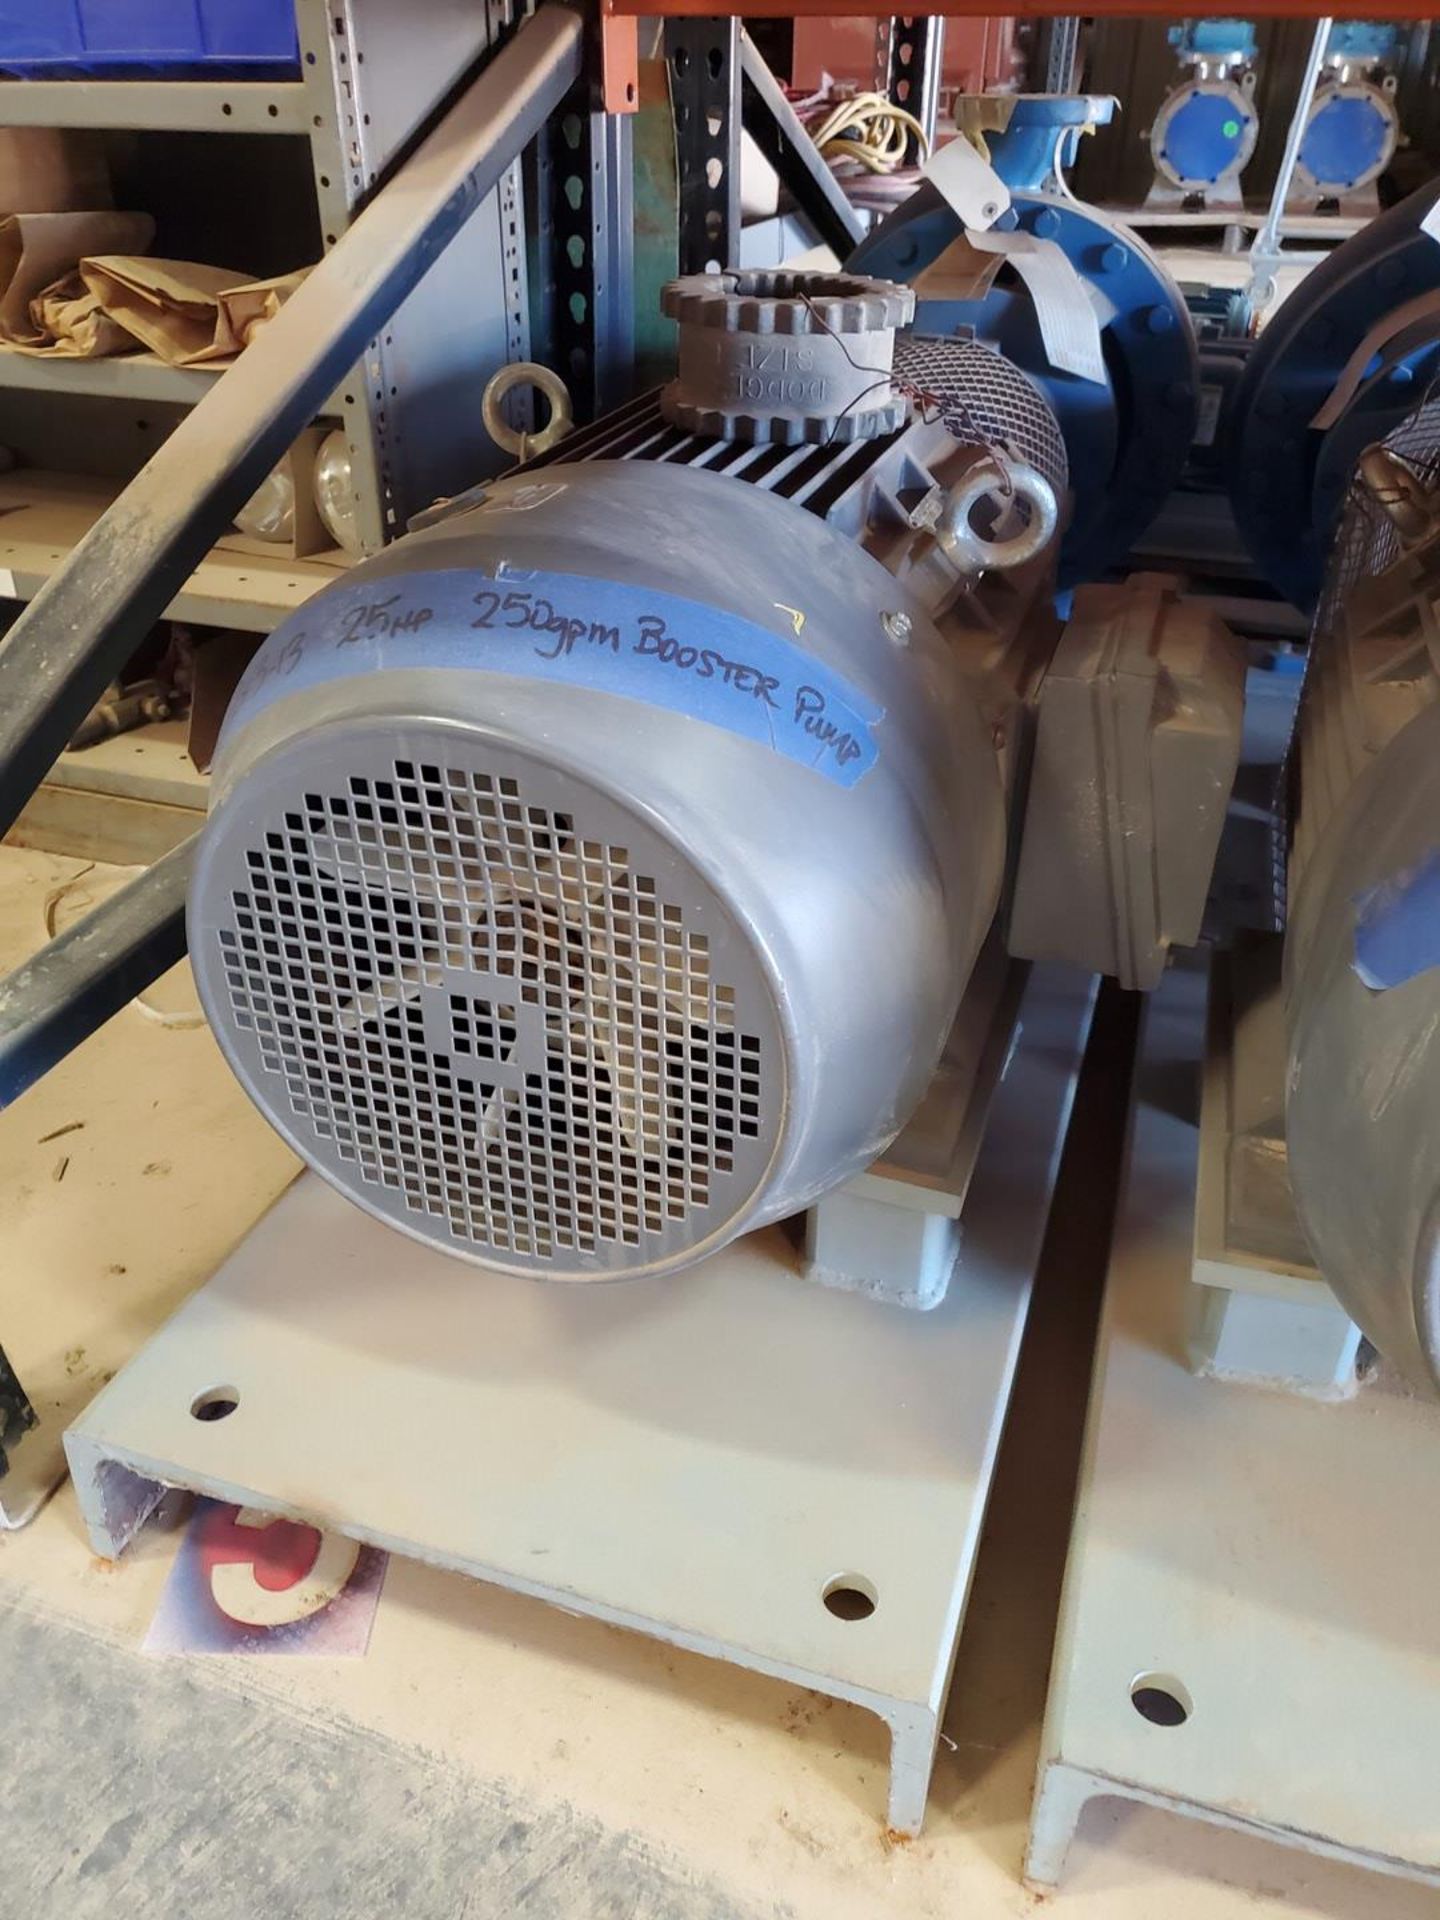 Booster Pump 2x3-13, 25HP, 250gpm - Image 2 of 6